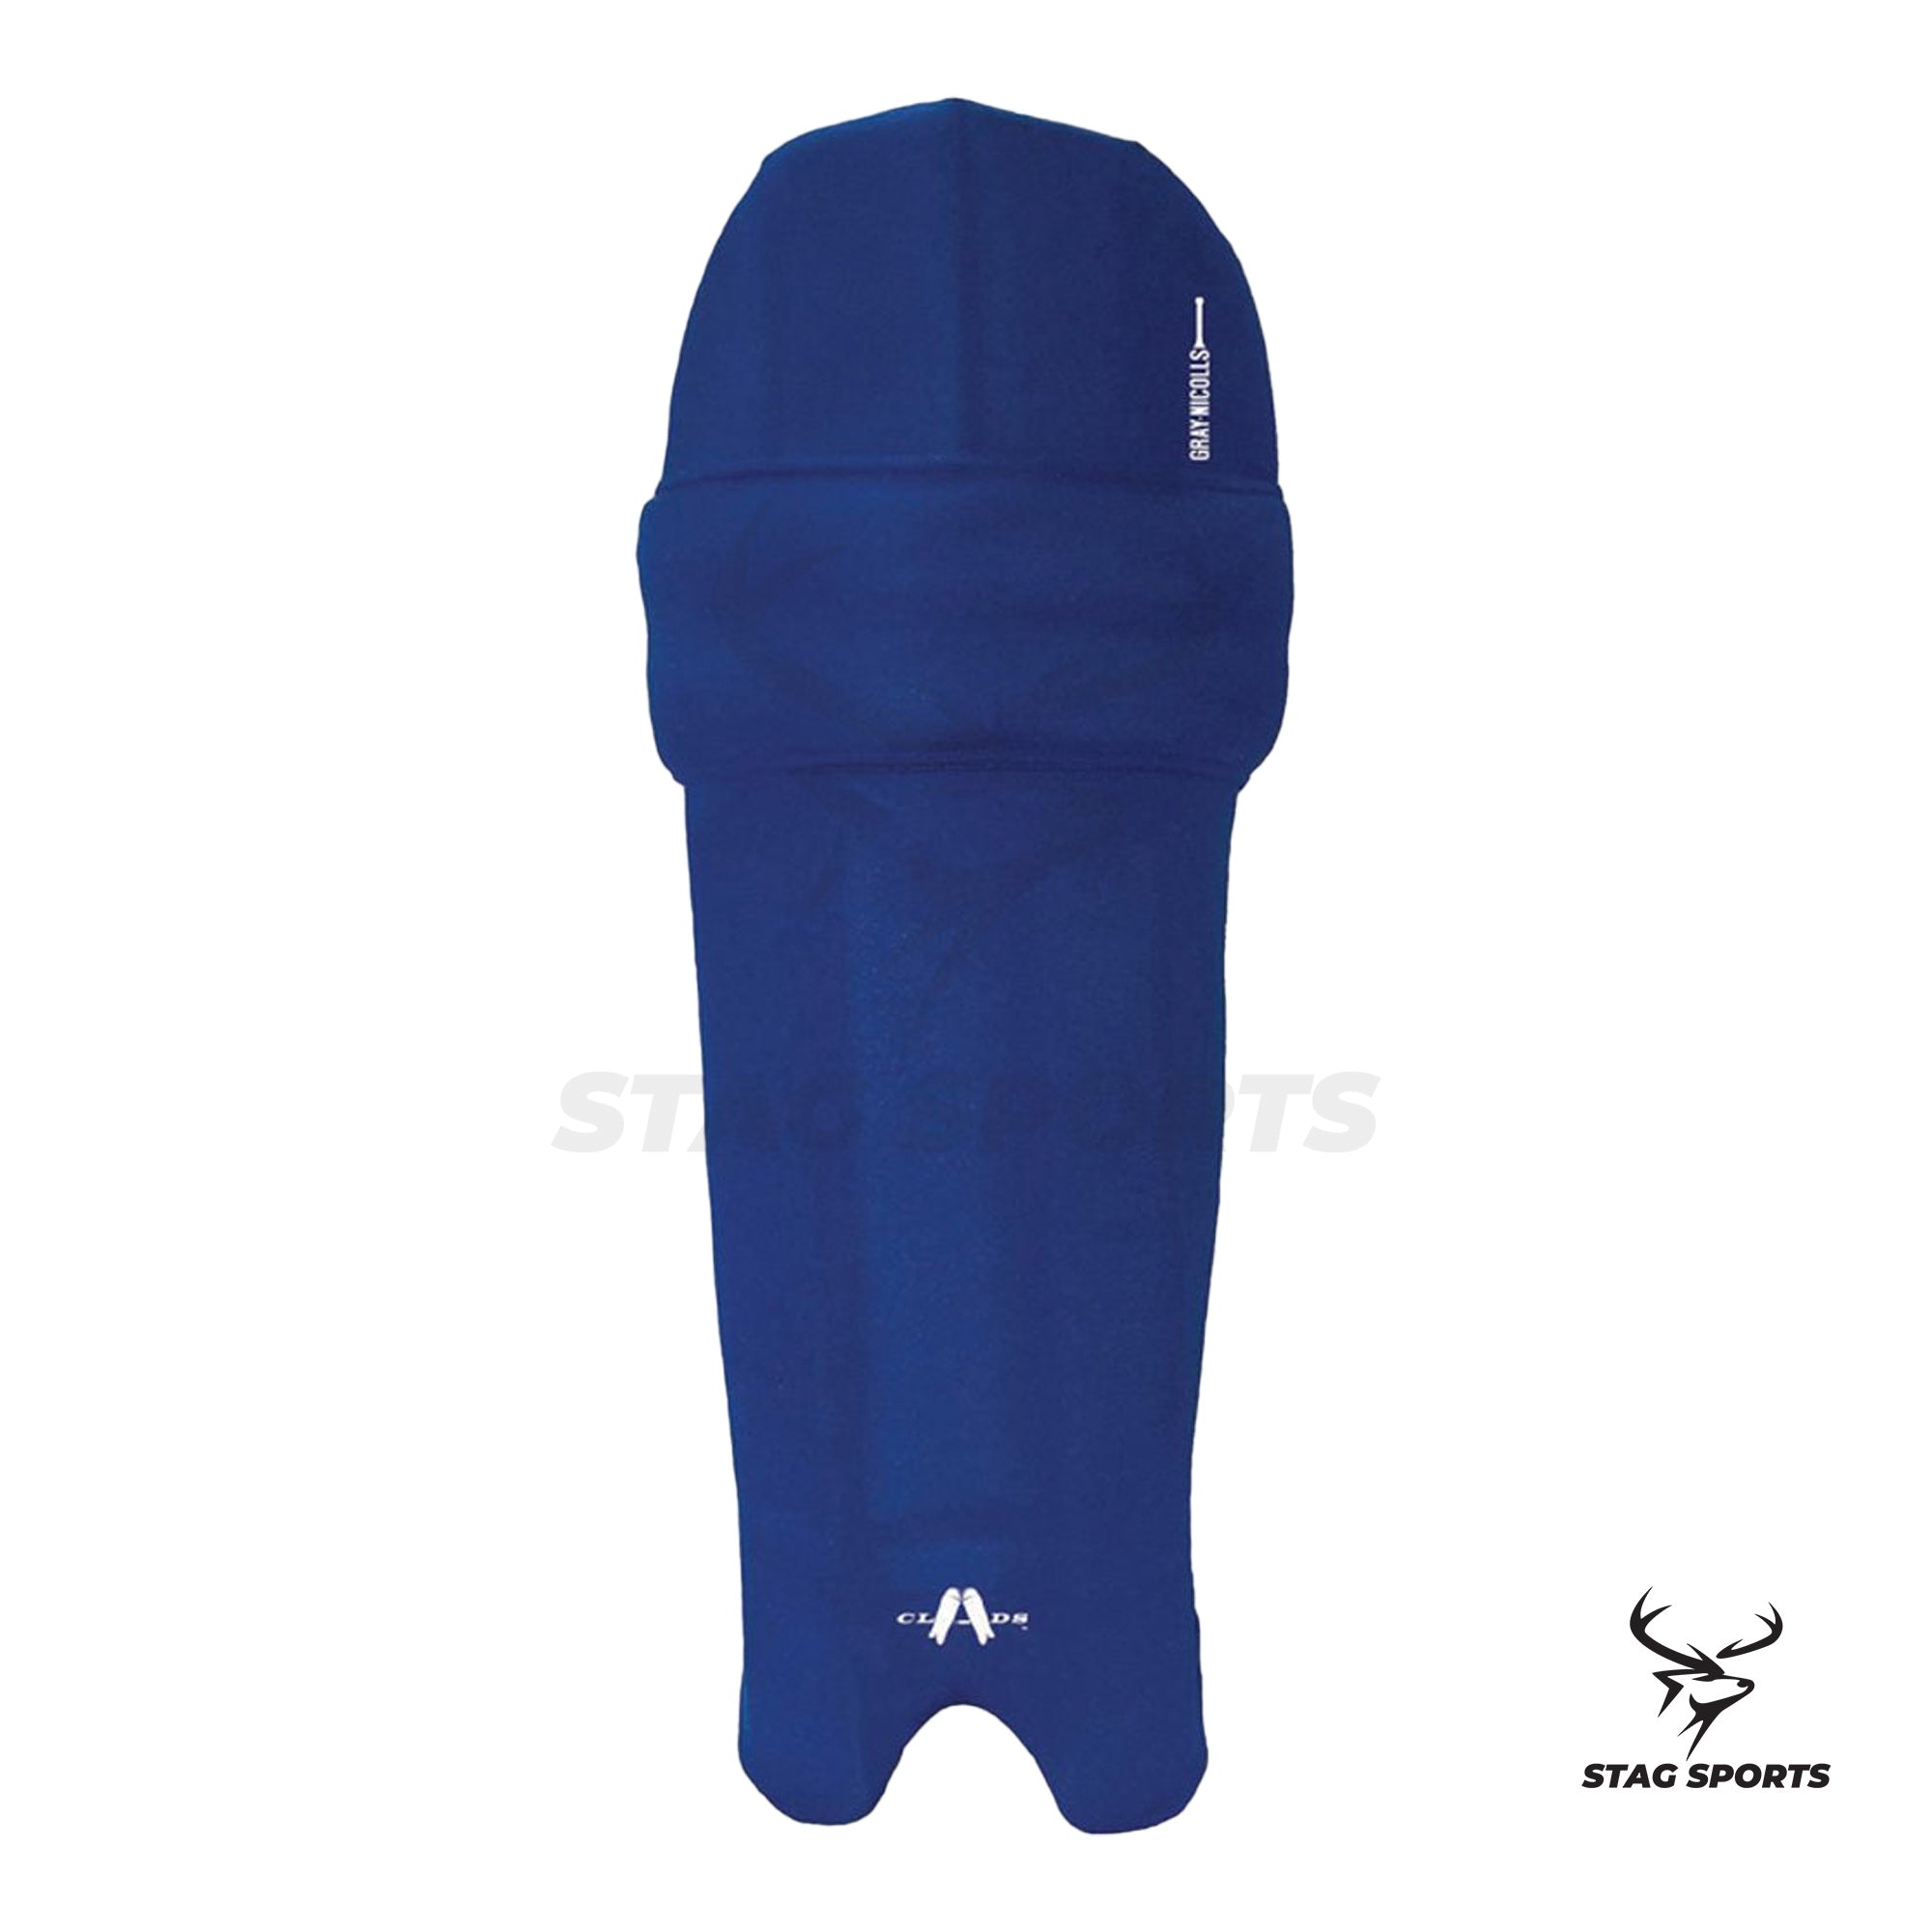 CLADS COLOURED BATTING PAD COVER